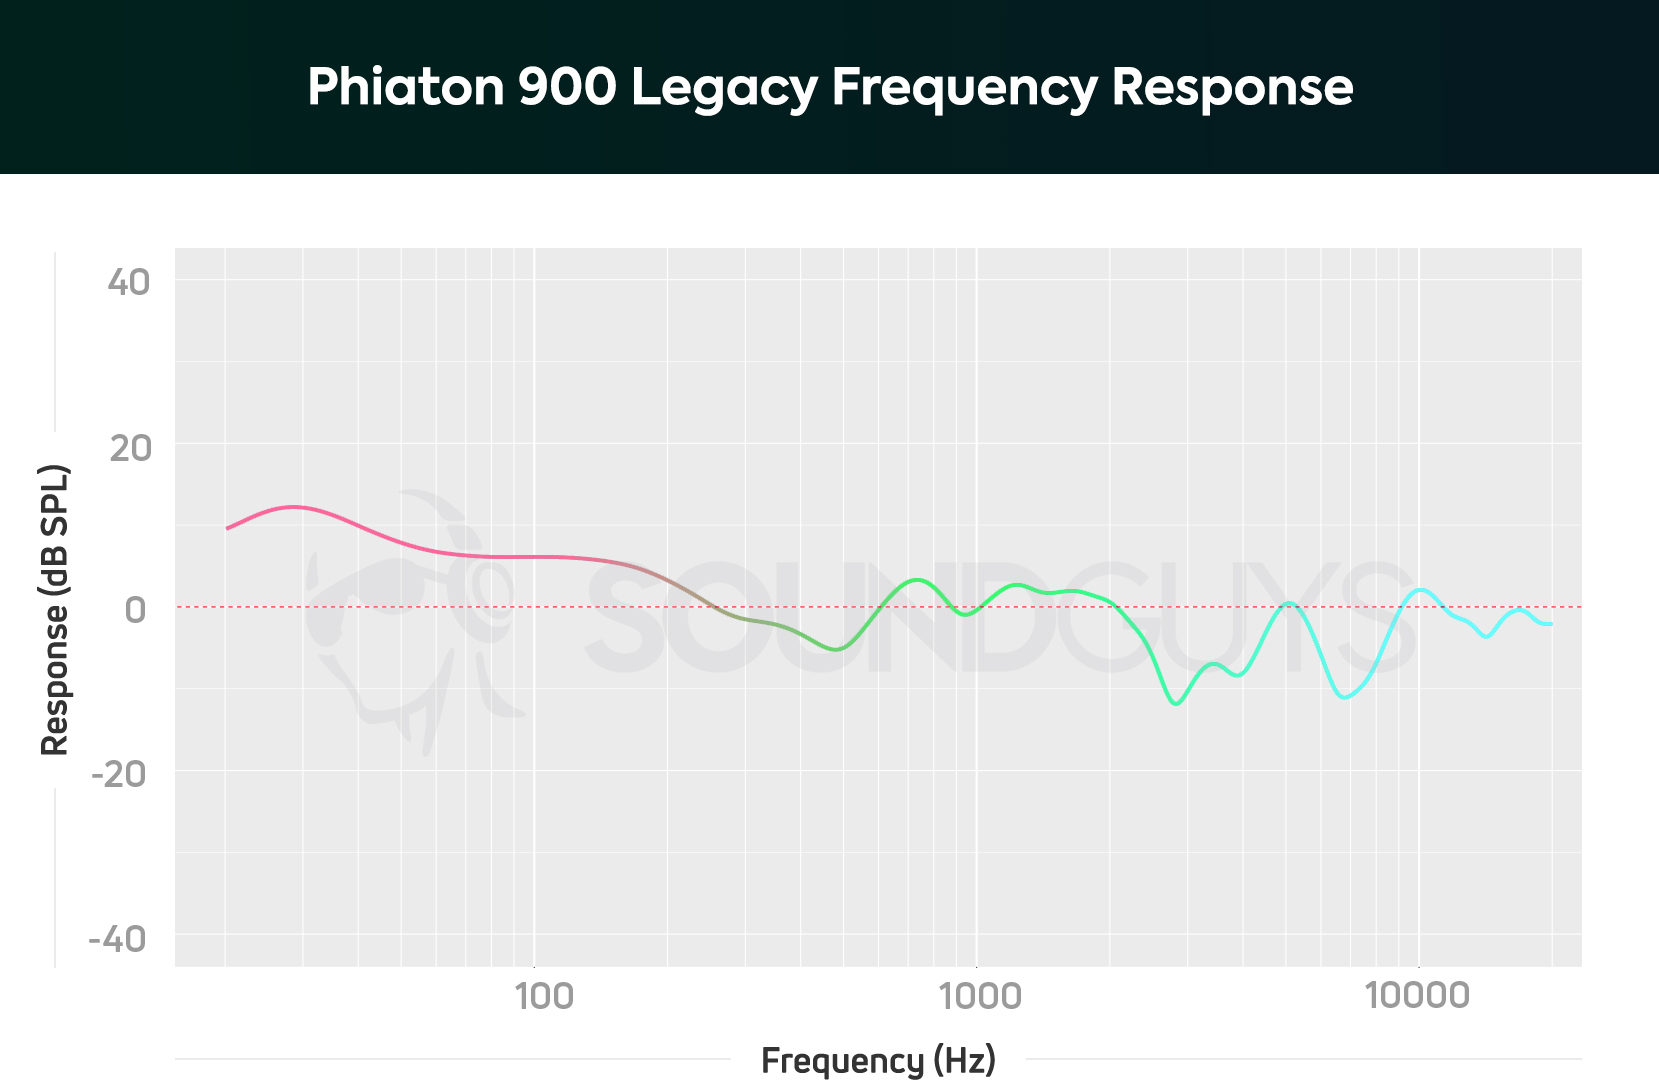 The Phiaton 900 Legacy frequency response showing the extra bass emphasis and deviations in the treble frequency range.